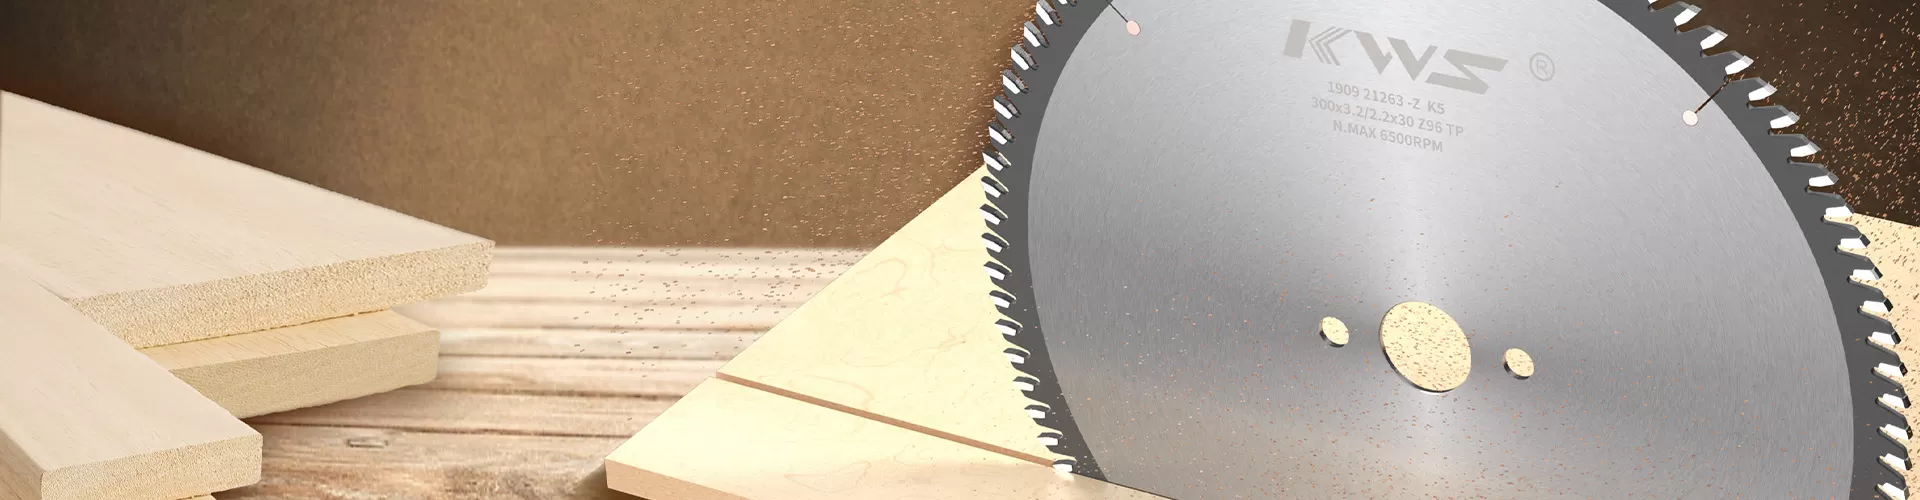 Cold Saw for High Carbon Steel Cutting